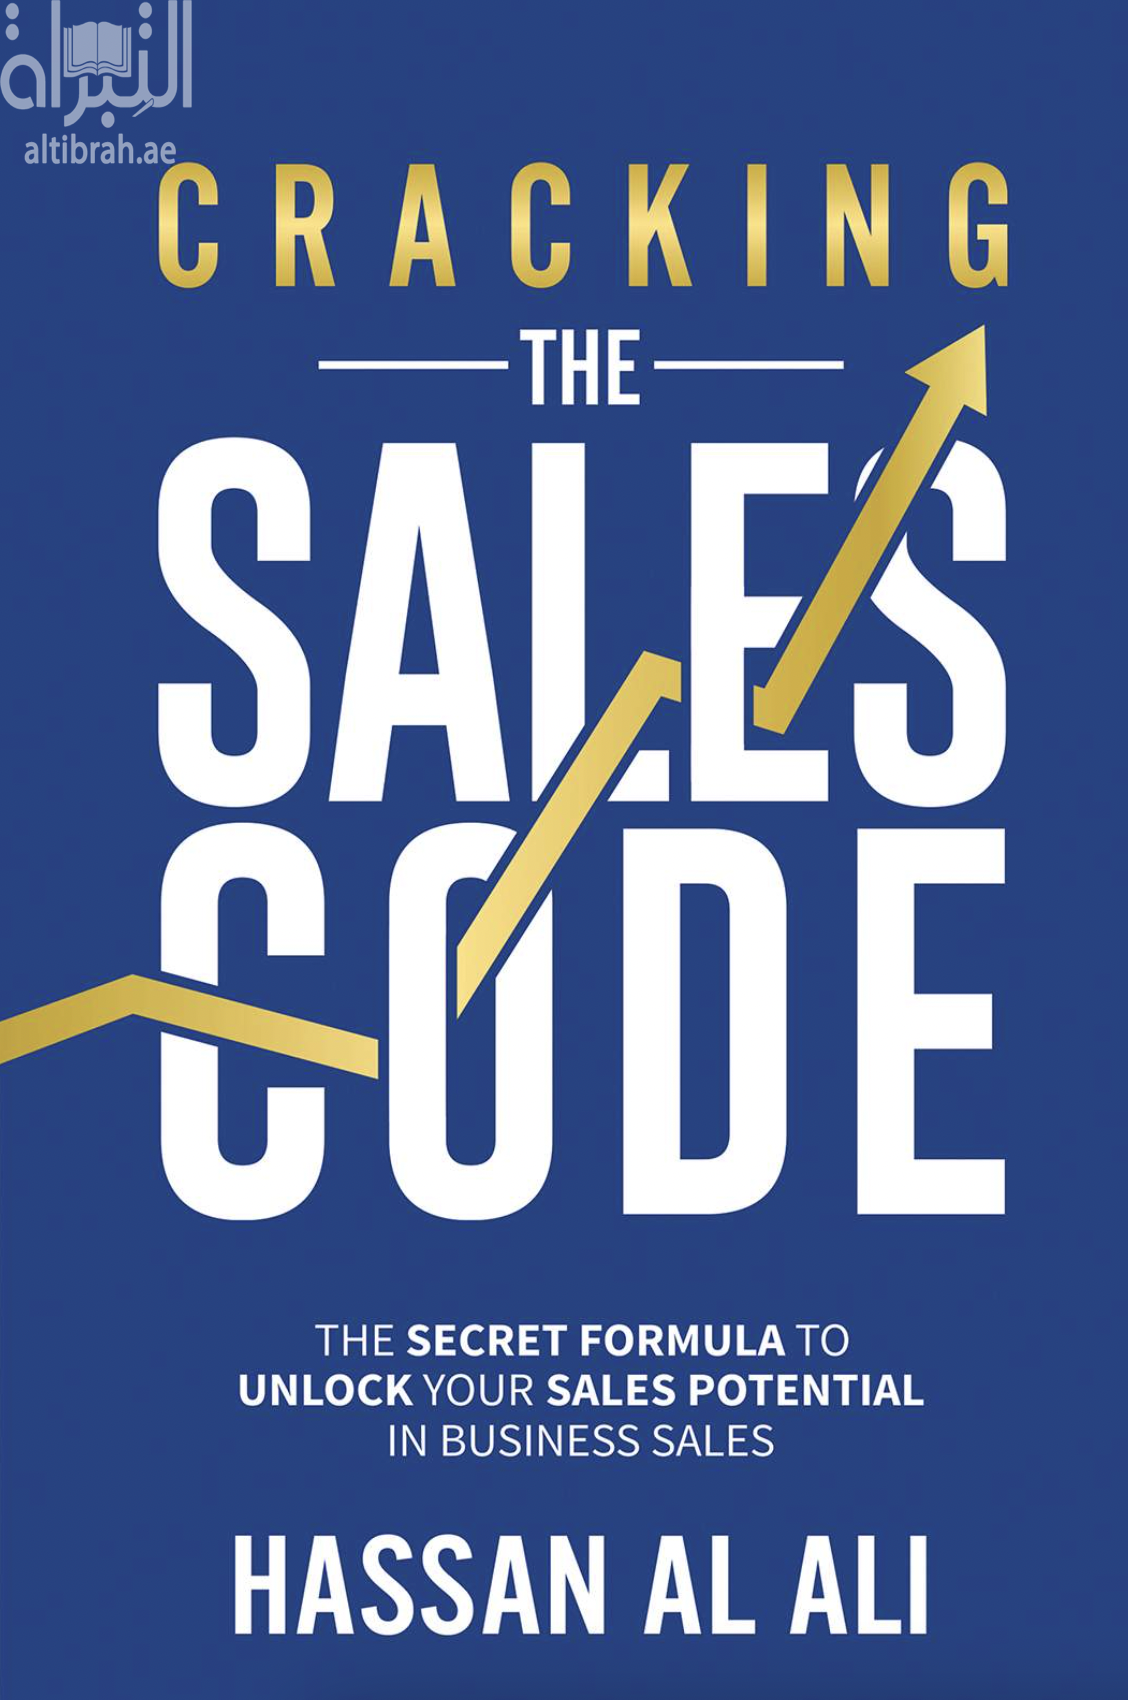 Cracking the Sales Code